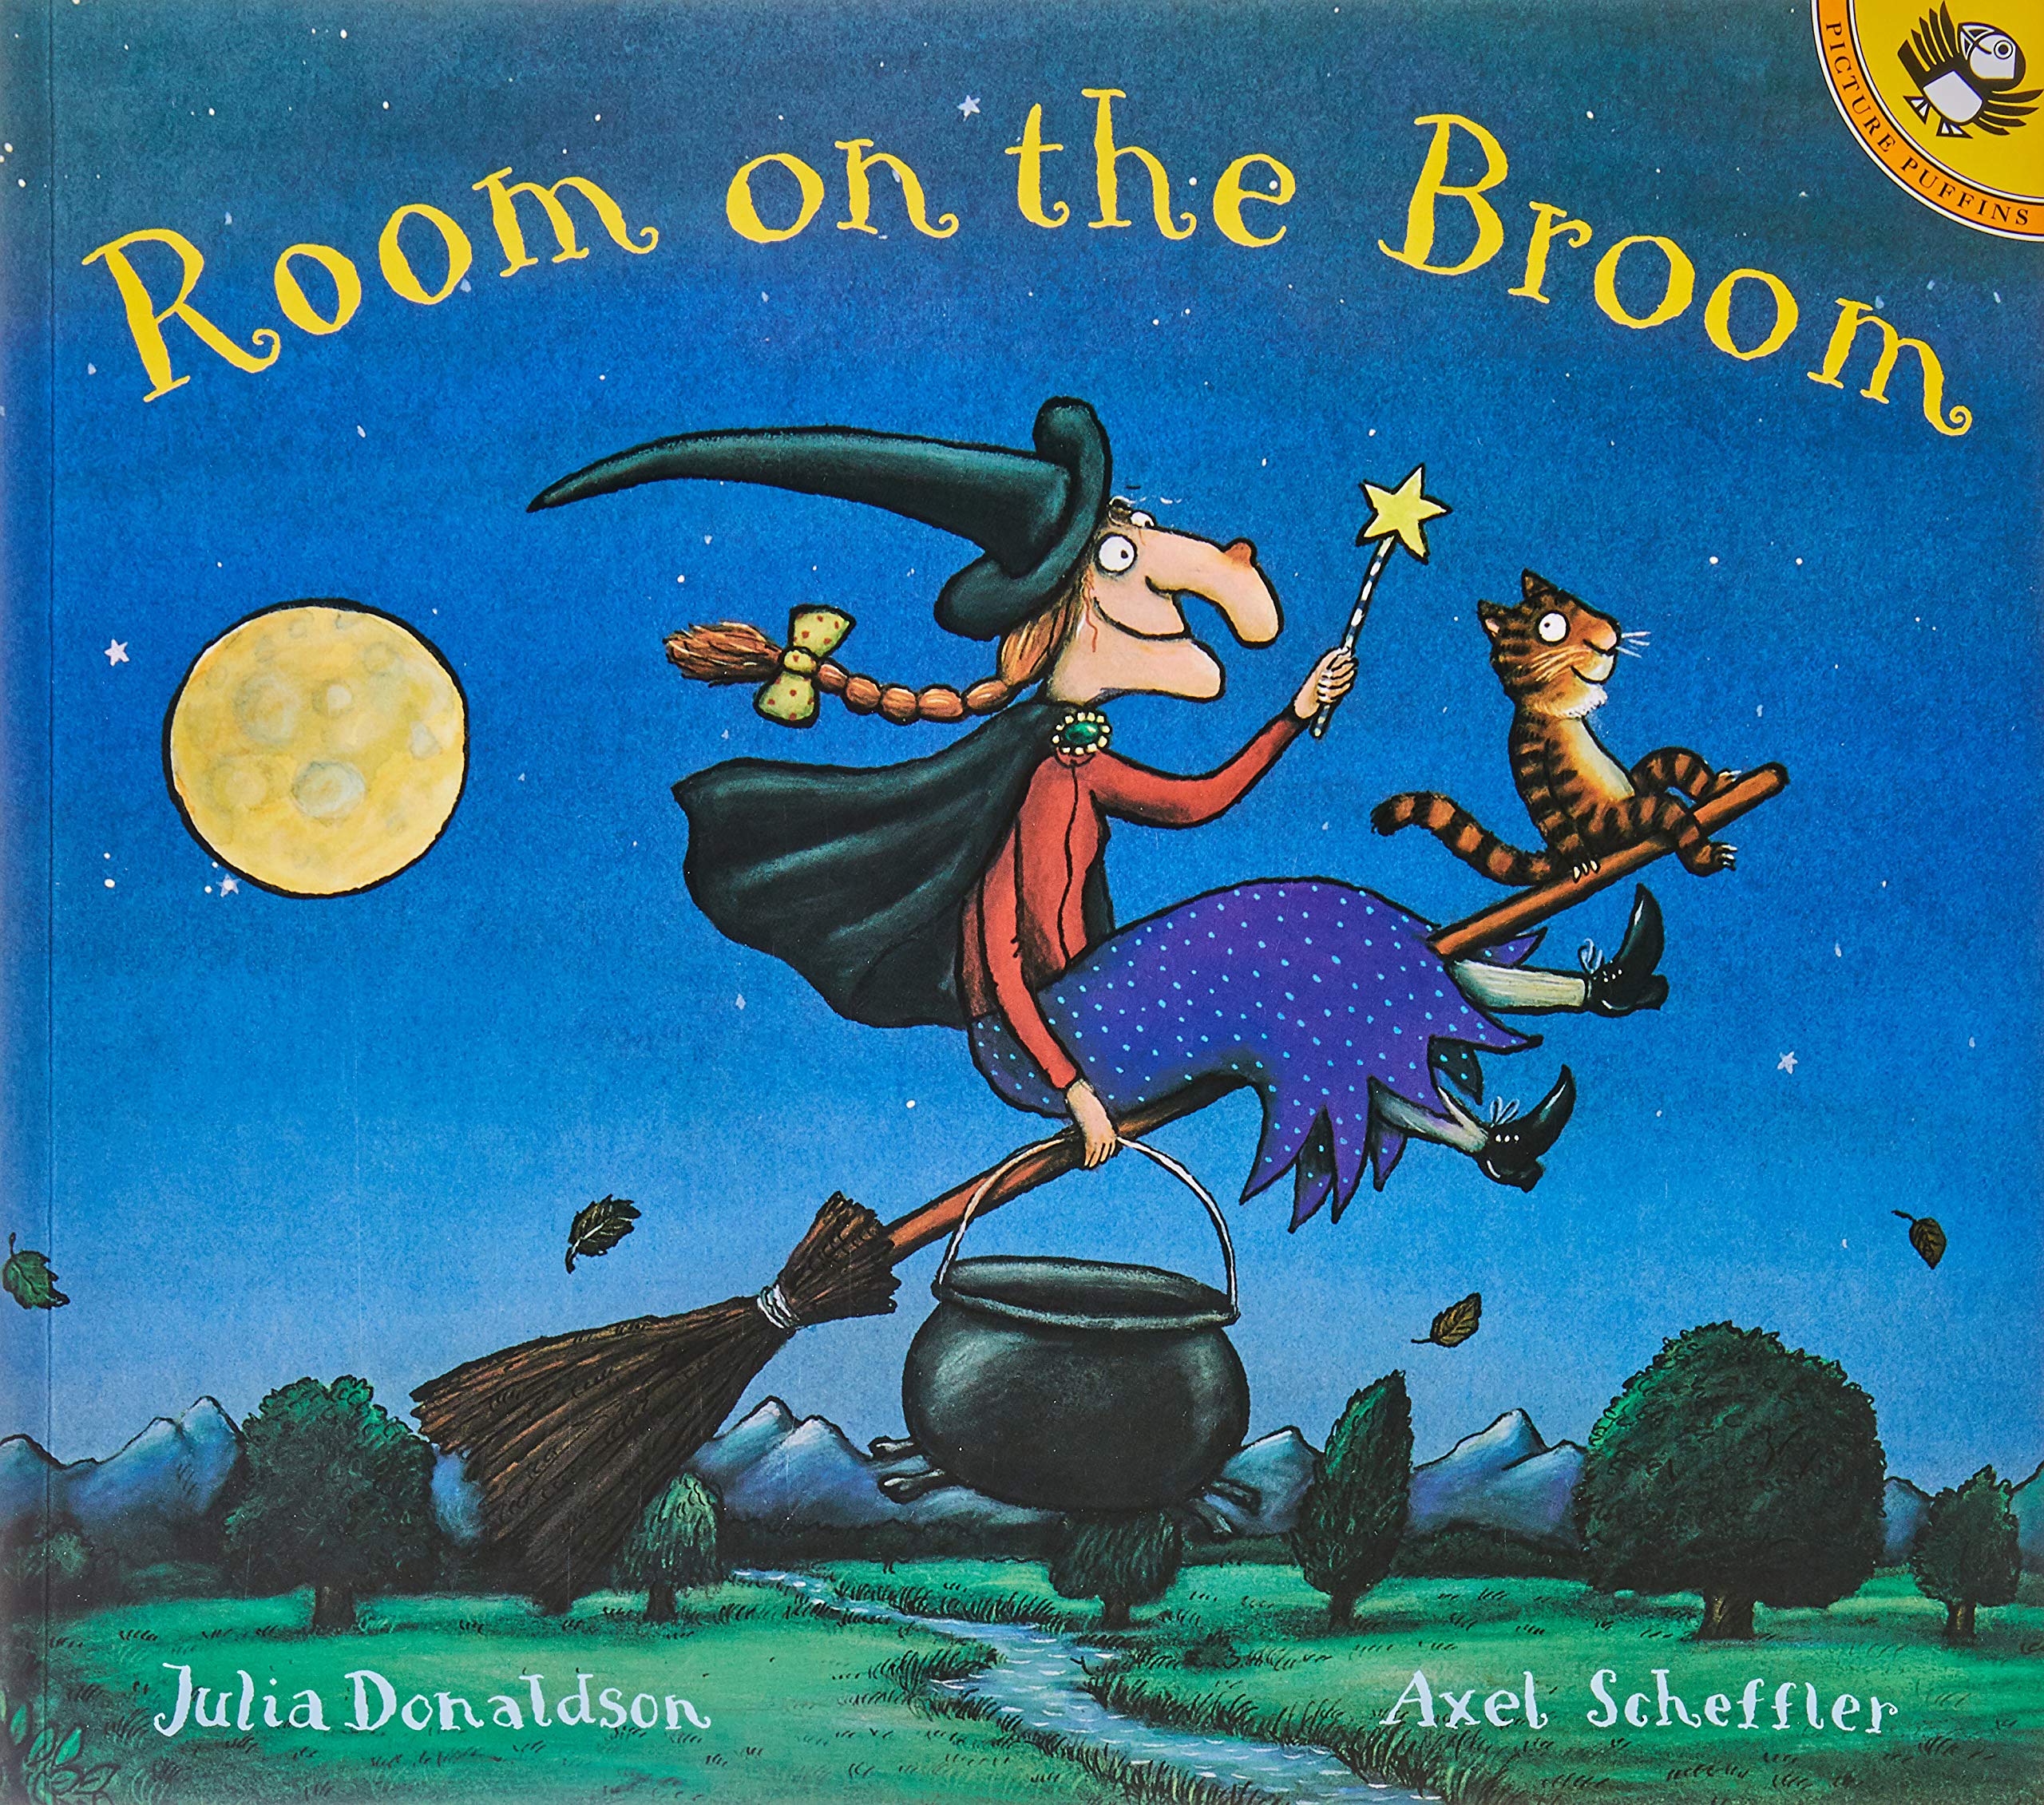 Room on the Broom by Julia Donaldson book cover